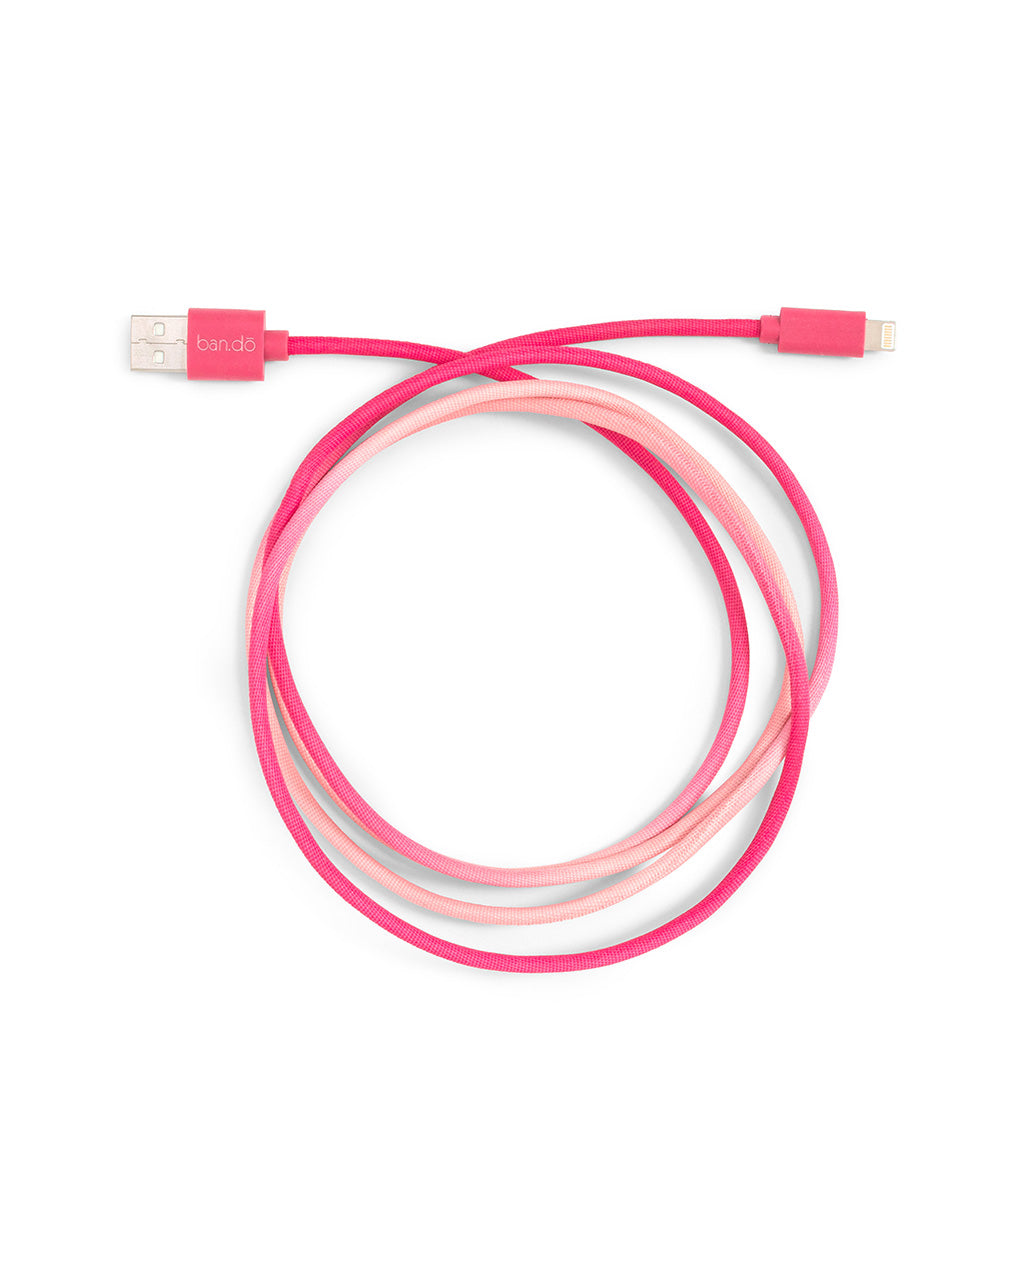 Back Me Up! Charging Cord - Hot Pink Tie Dye